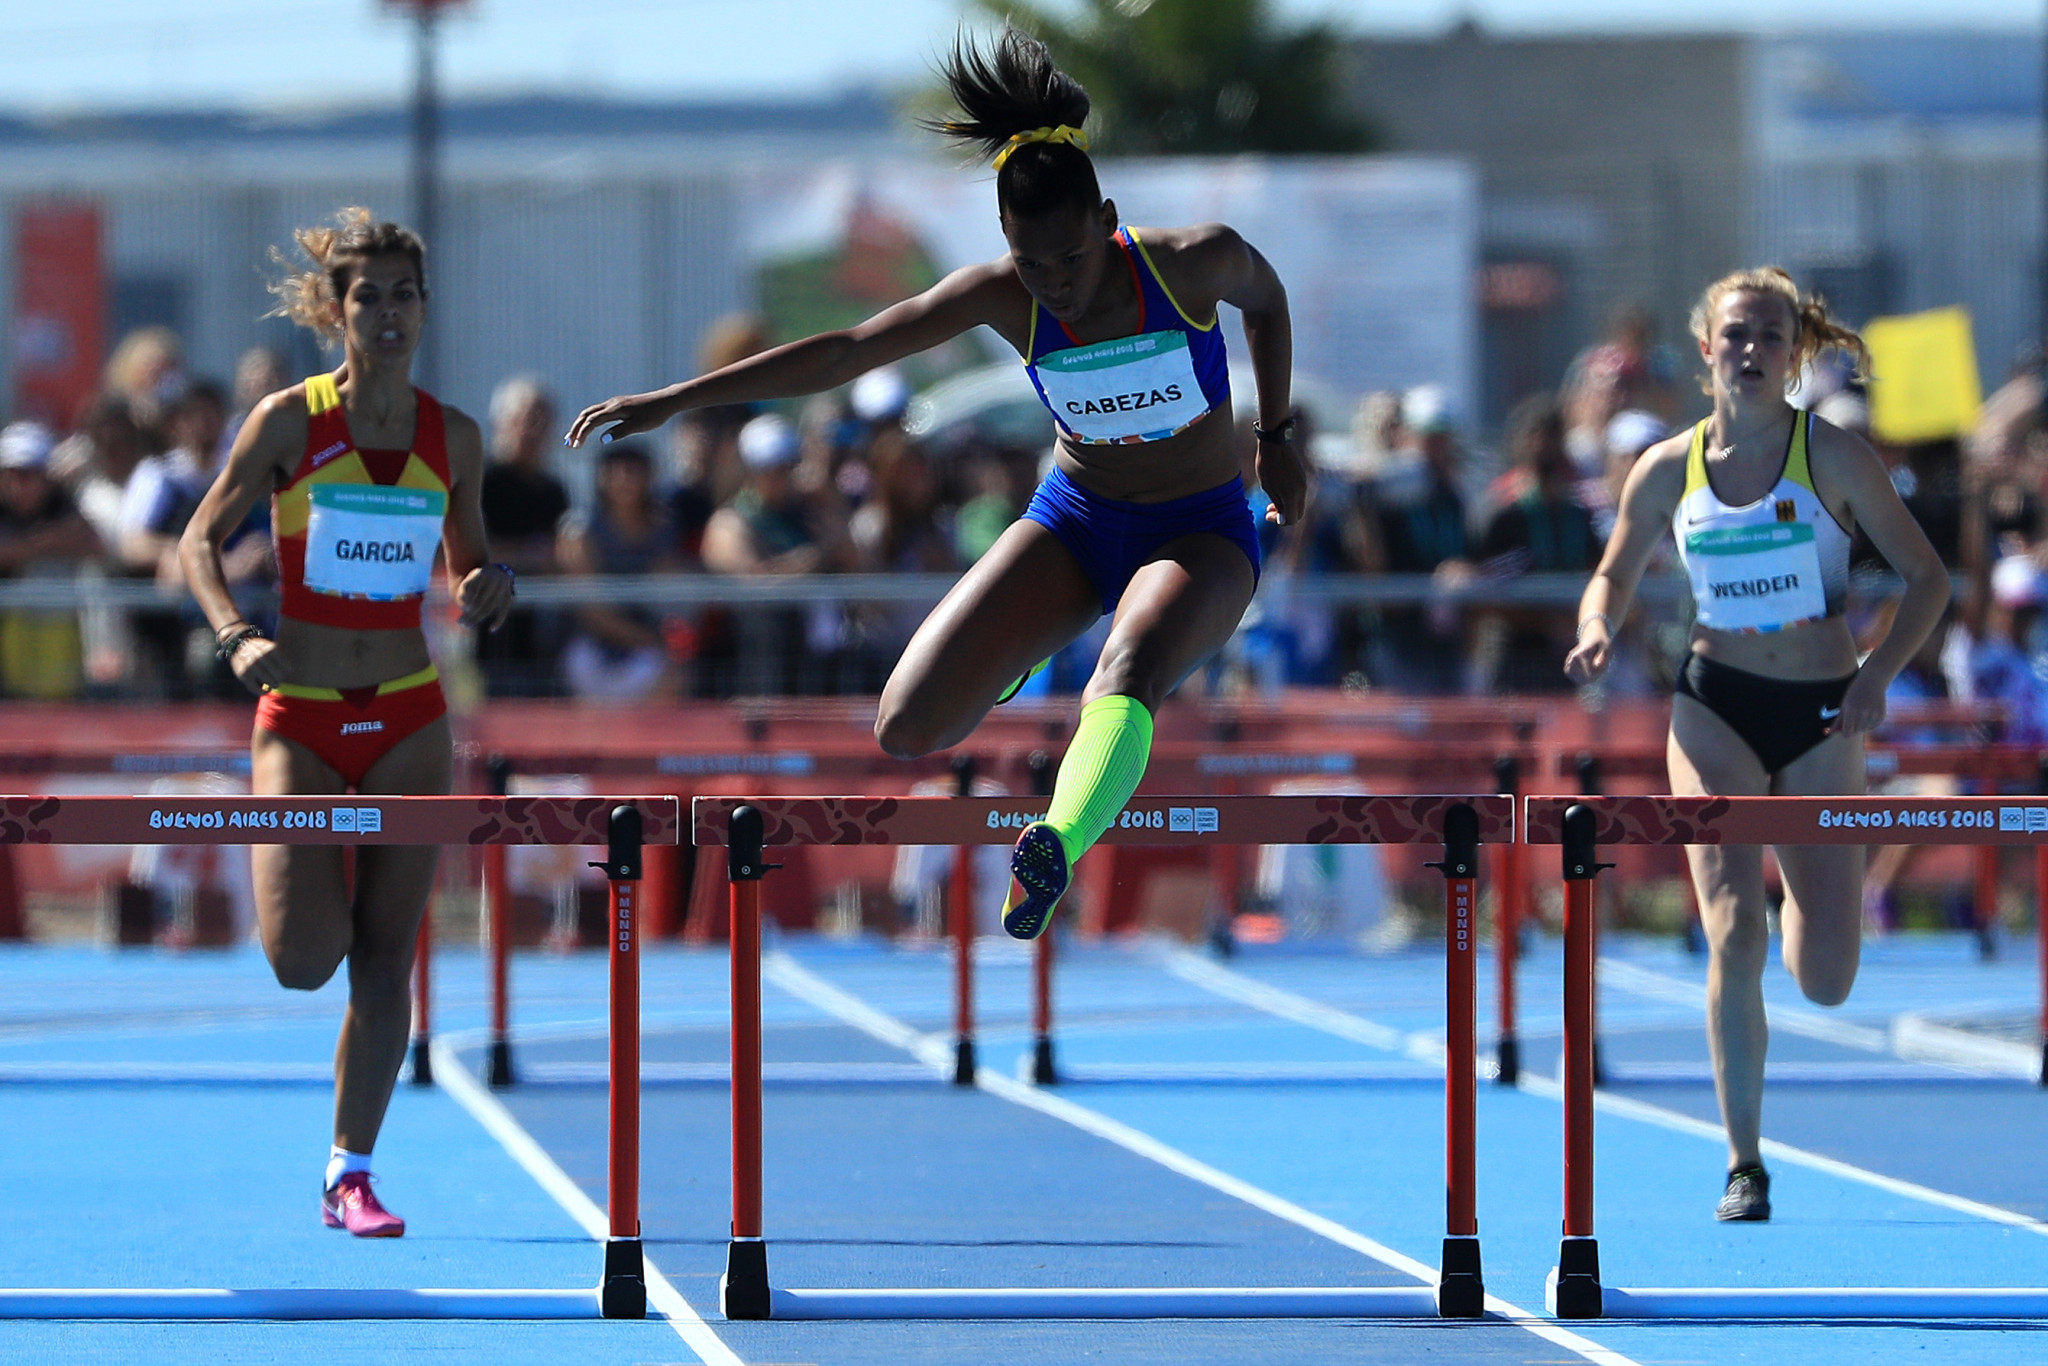 Cabezas Caracas produced a superb performance to win women's 400m hurdles gold for Colombia ©Getty Images